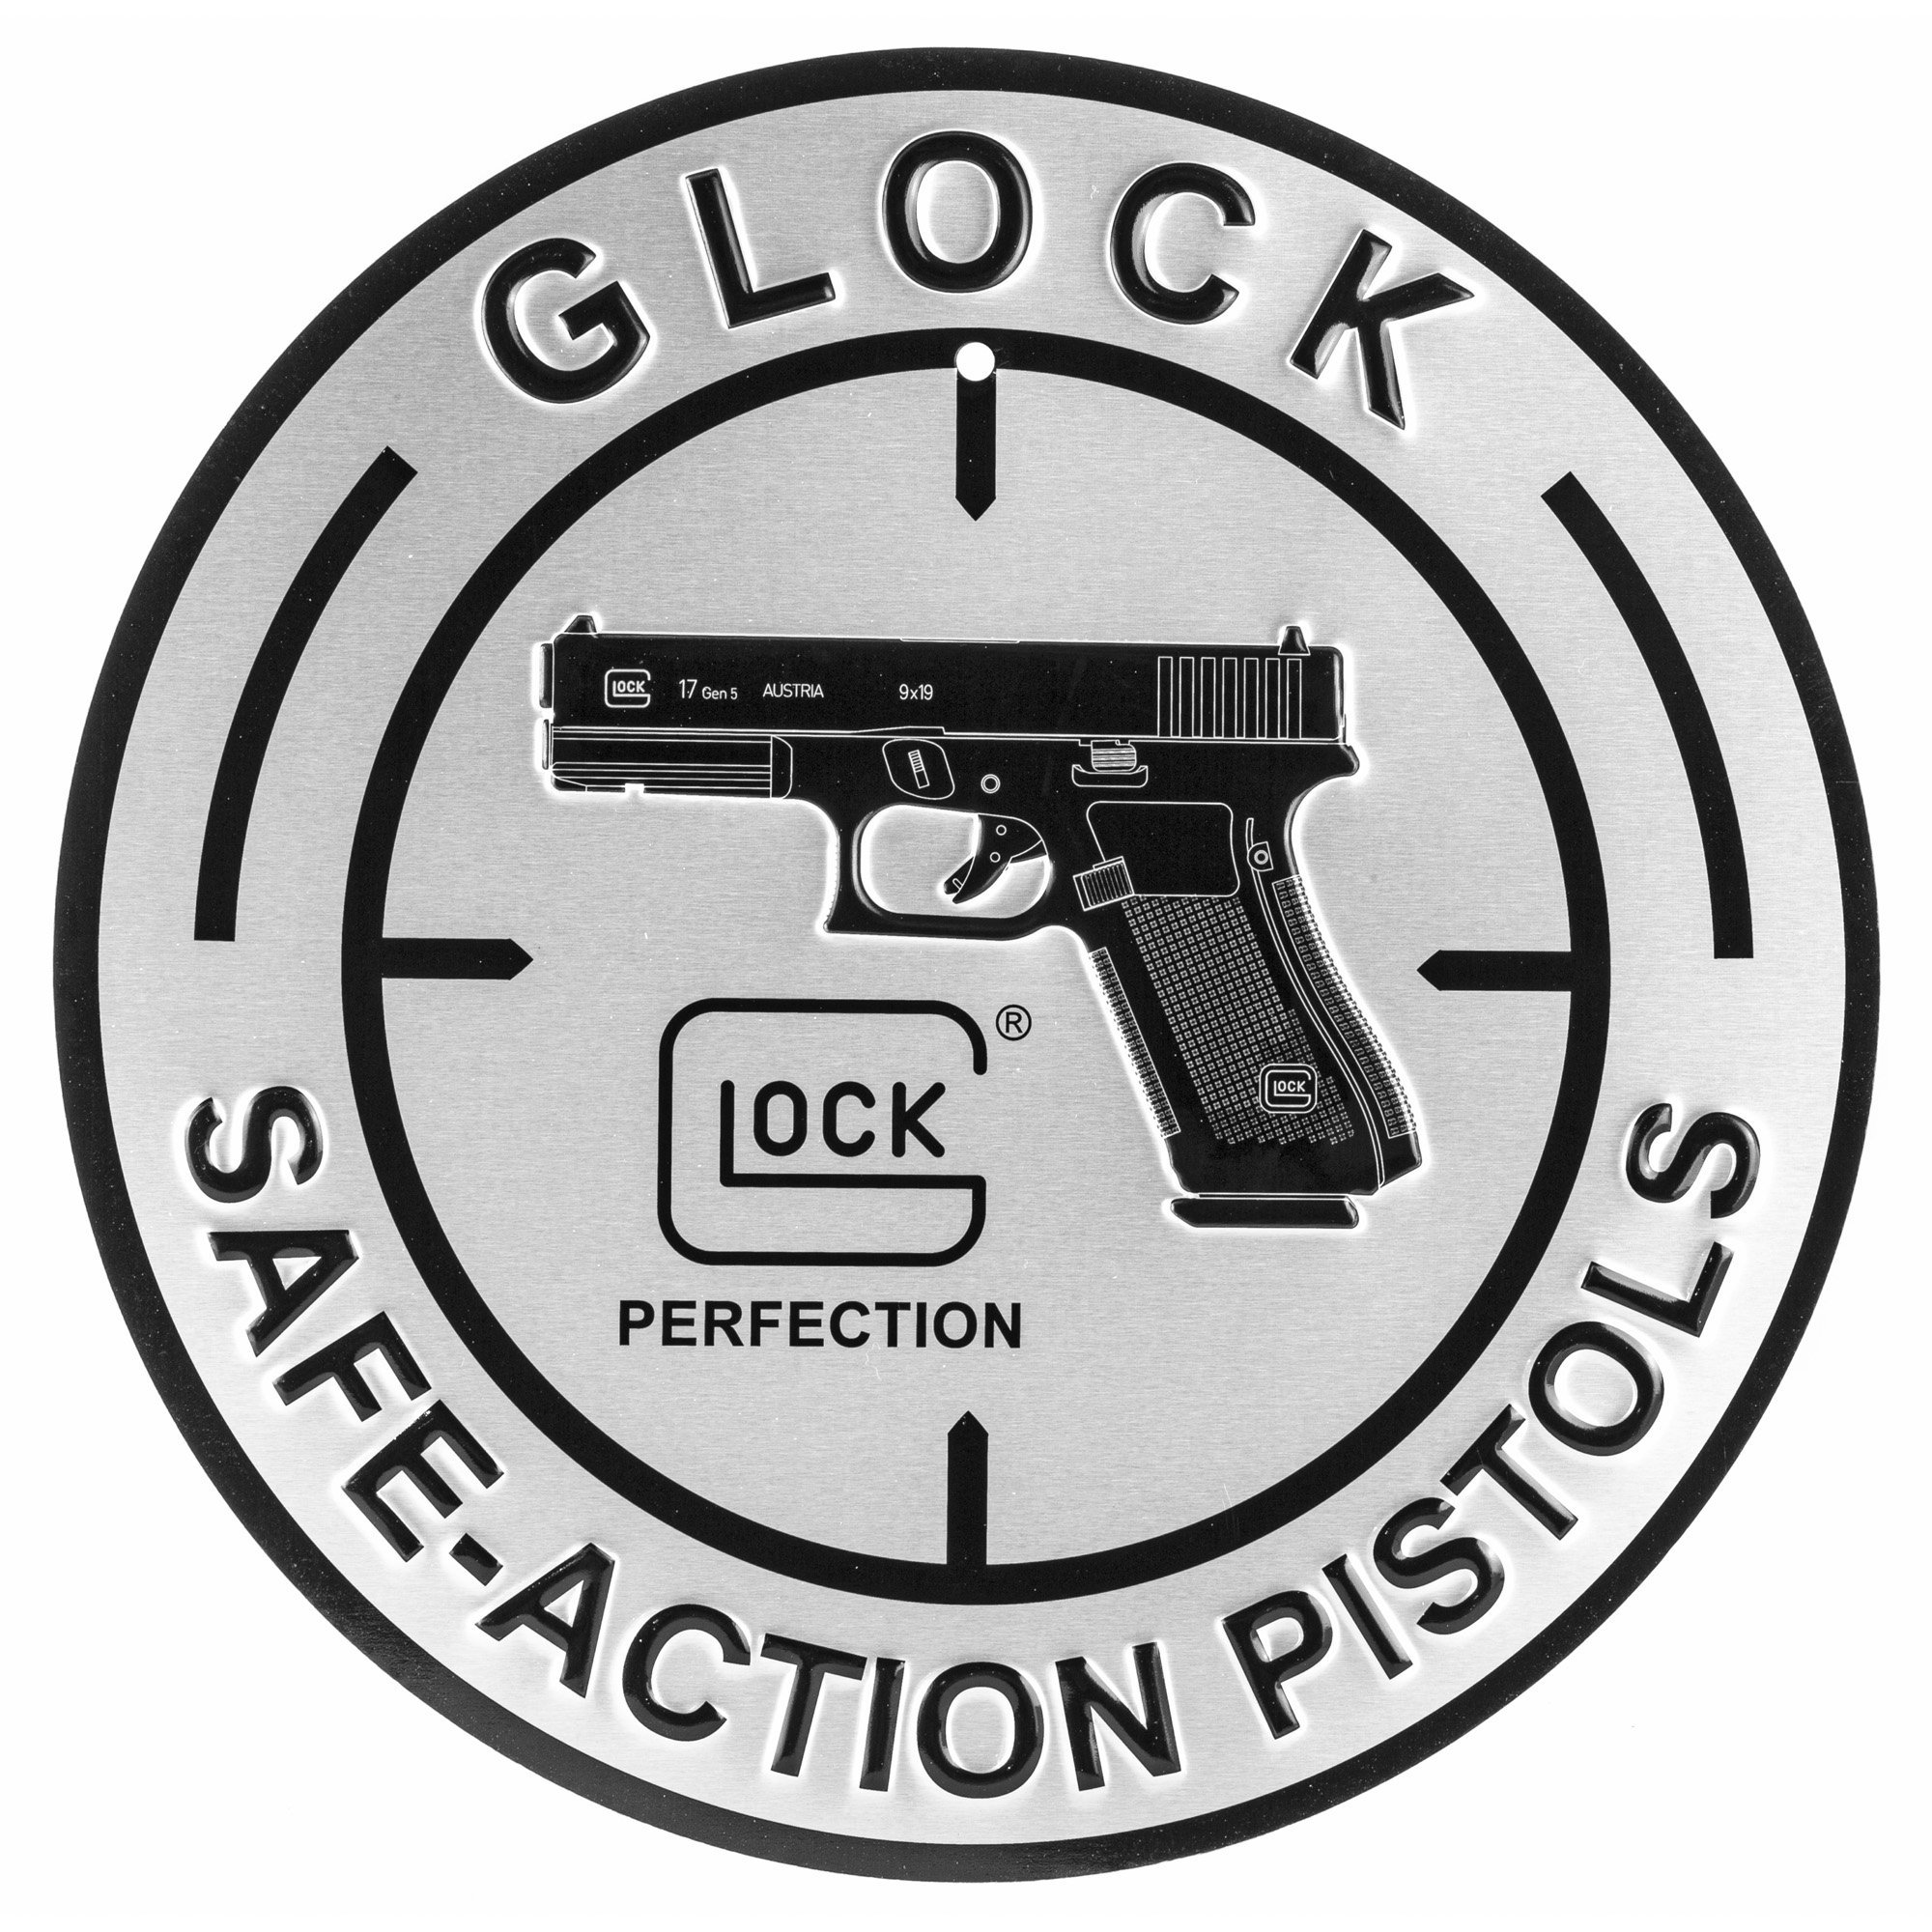 Glock Perfection Safe-Action Pistols Hat/Lapel pin  3/4" In Diameter-New 